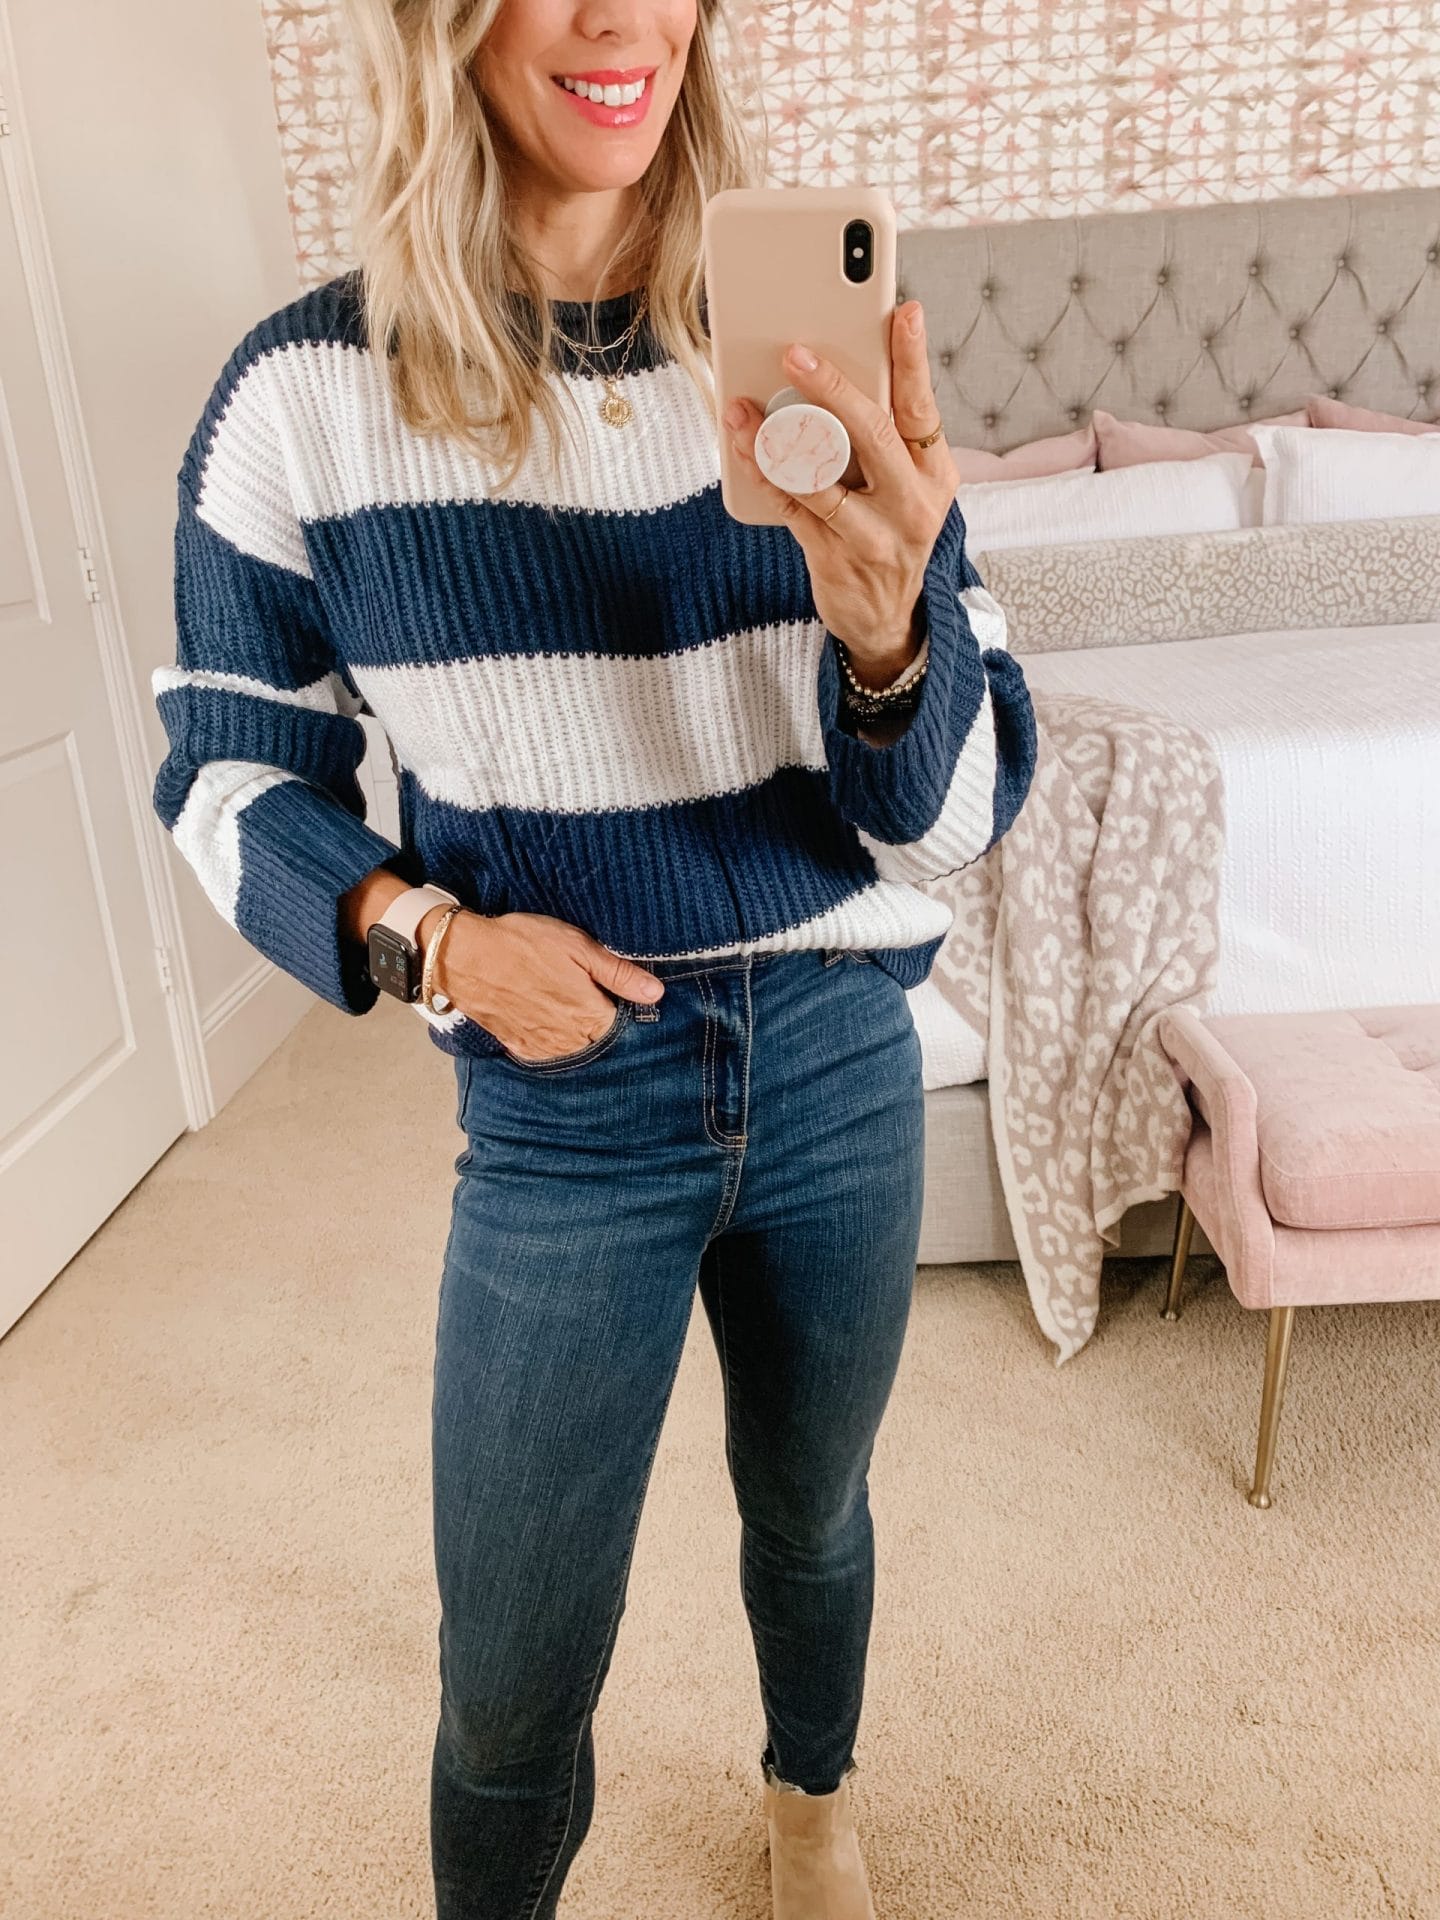 Amazon women's striped sweater and jeans